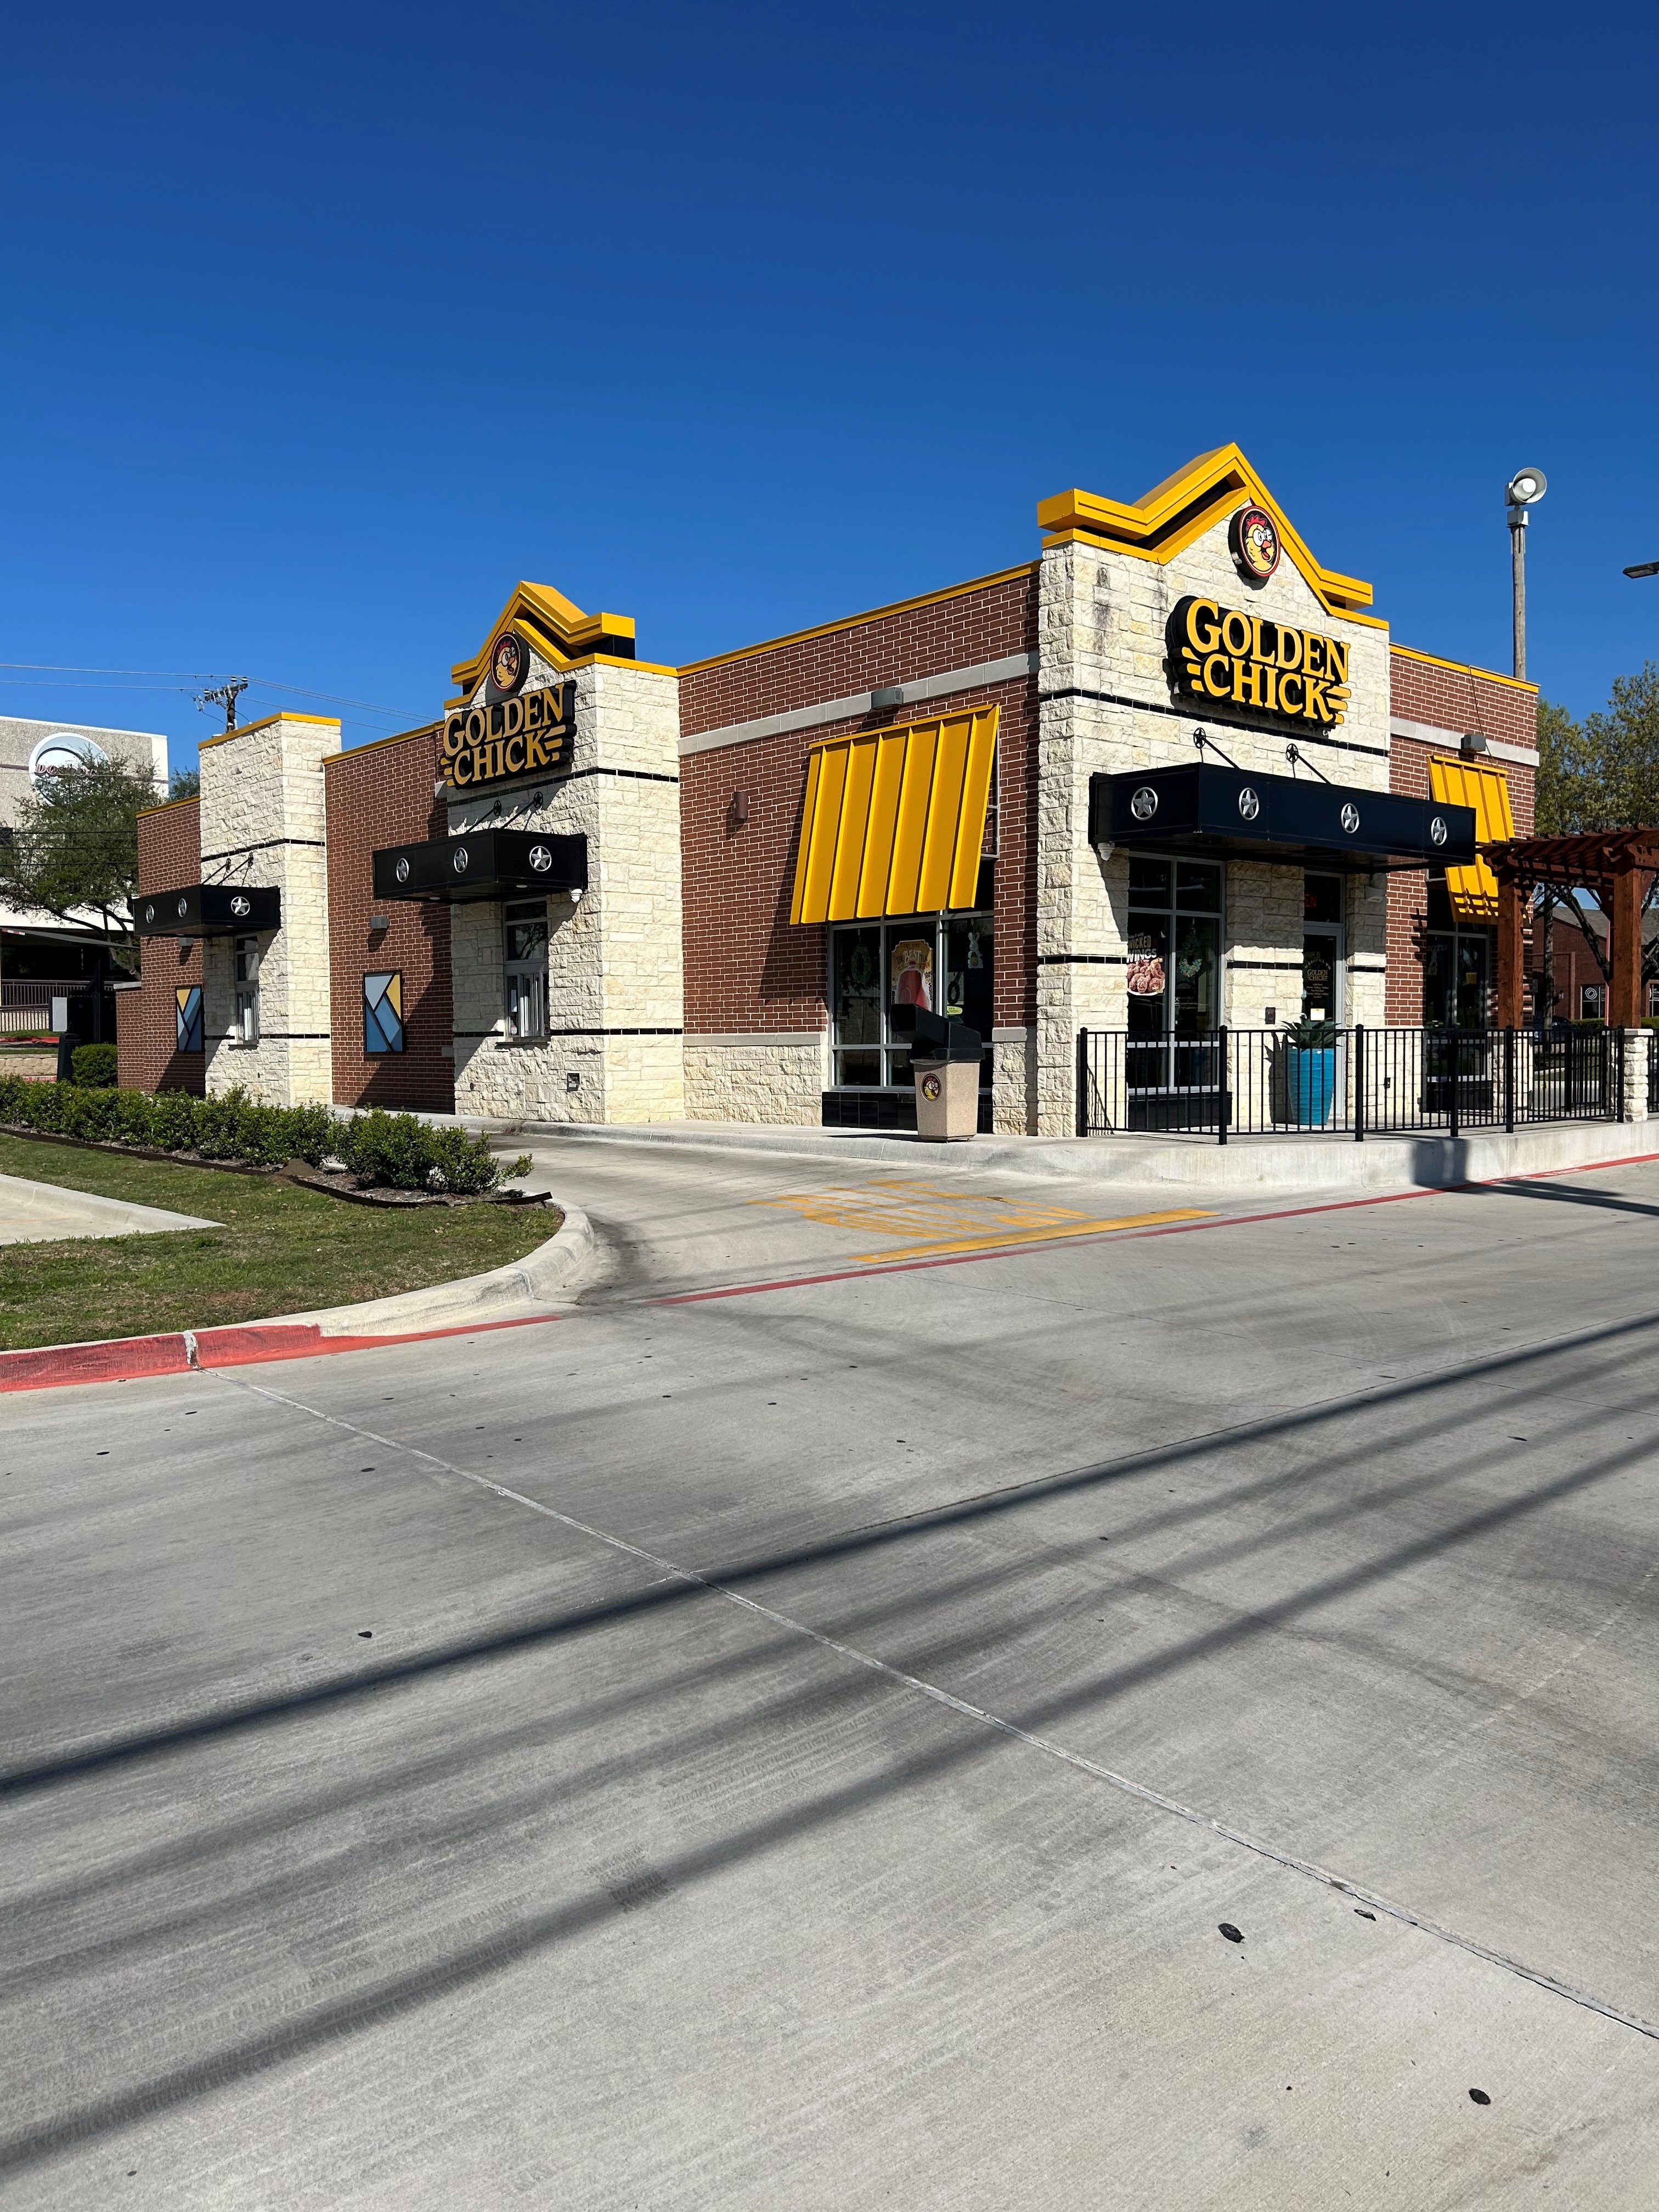 Golden Chick storefront.  Your local Golden Chick fast food restaurant in Arlington, Texas